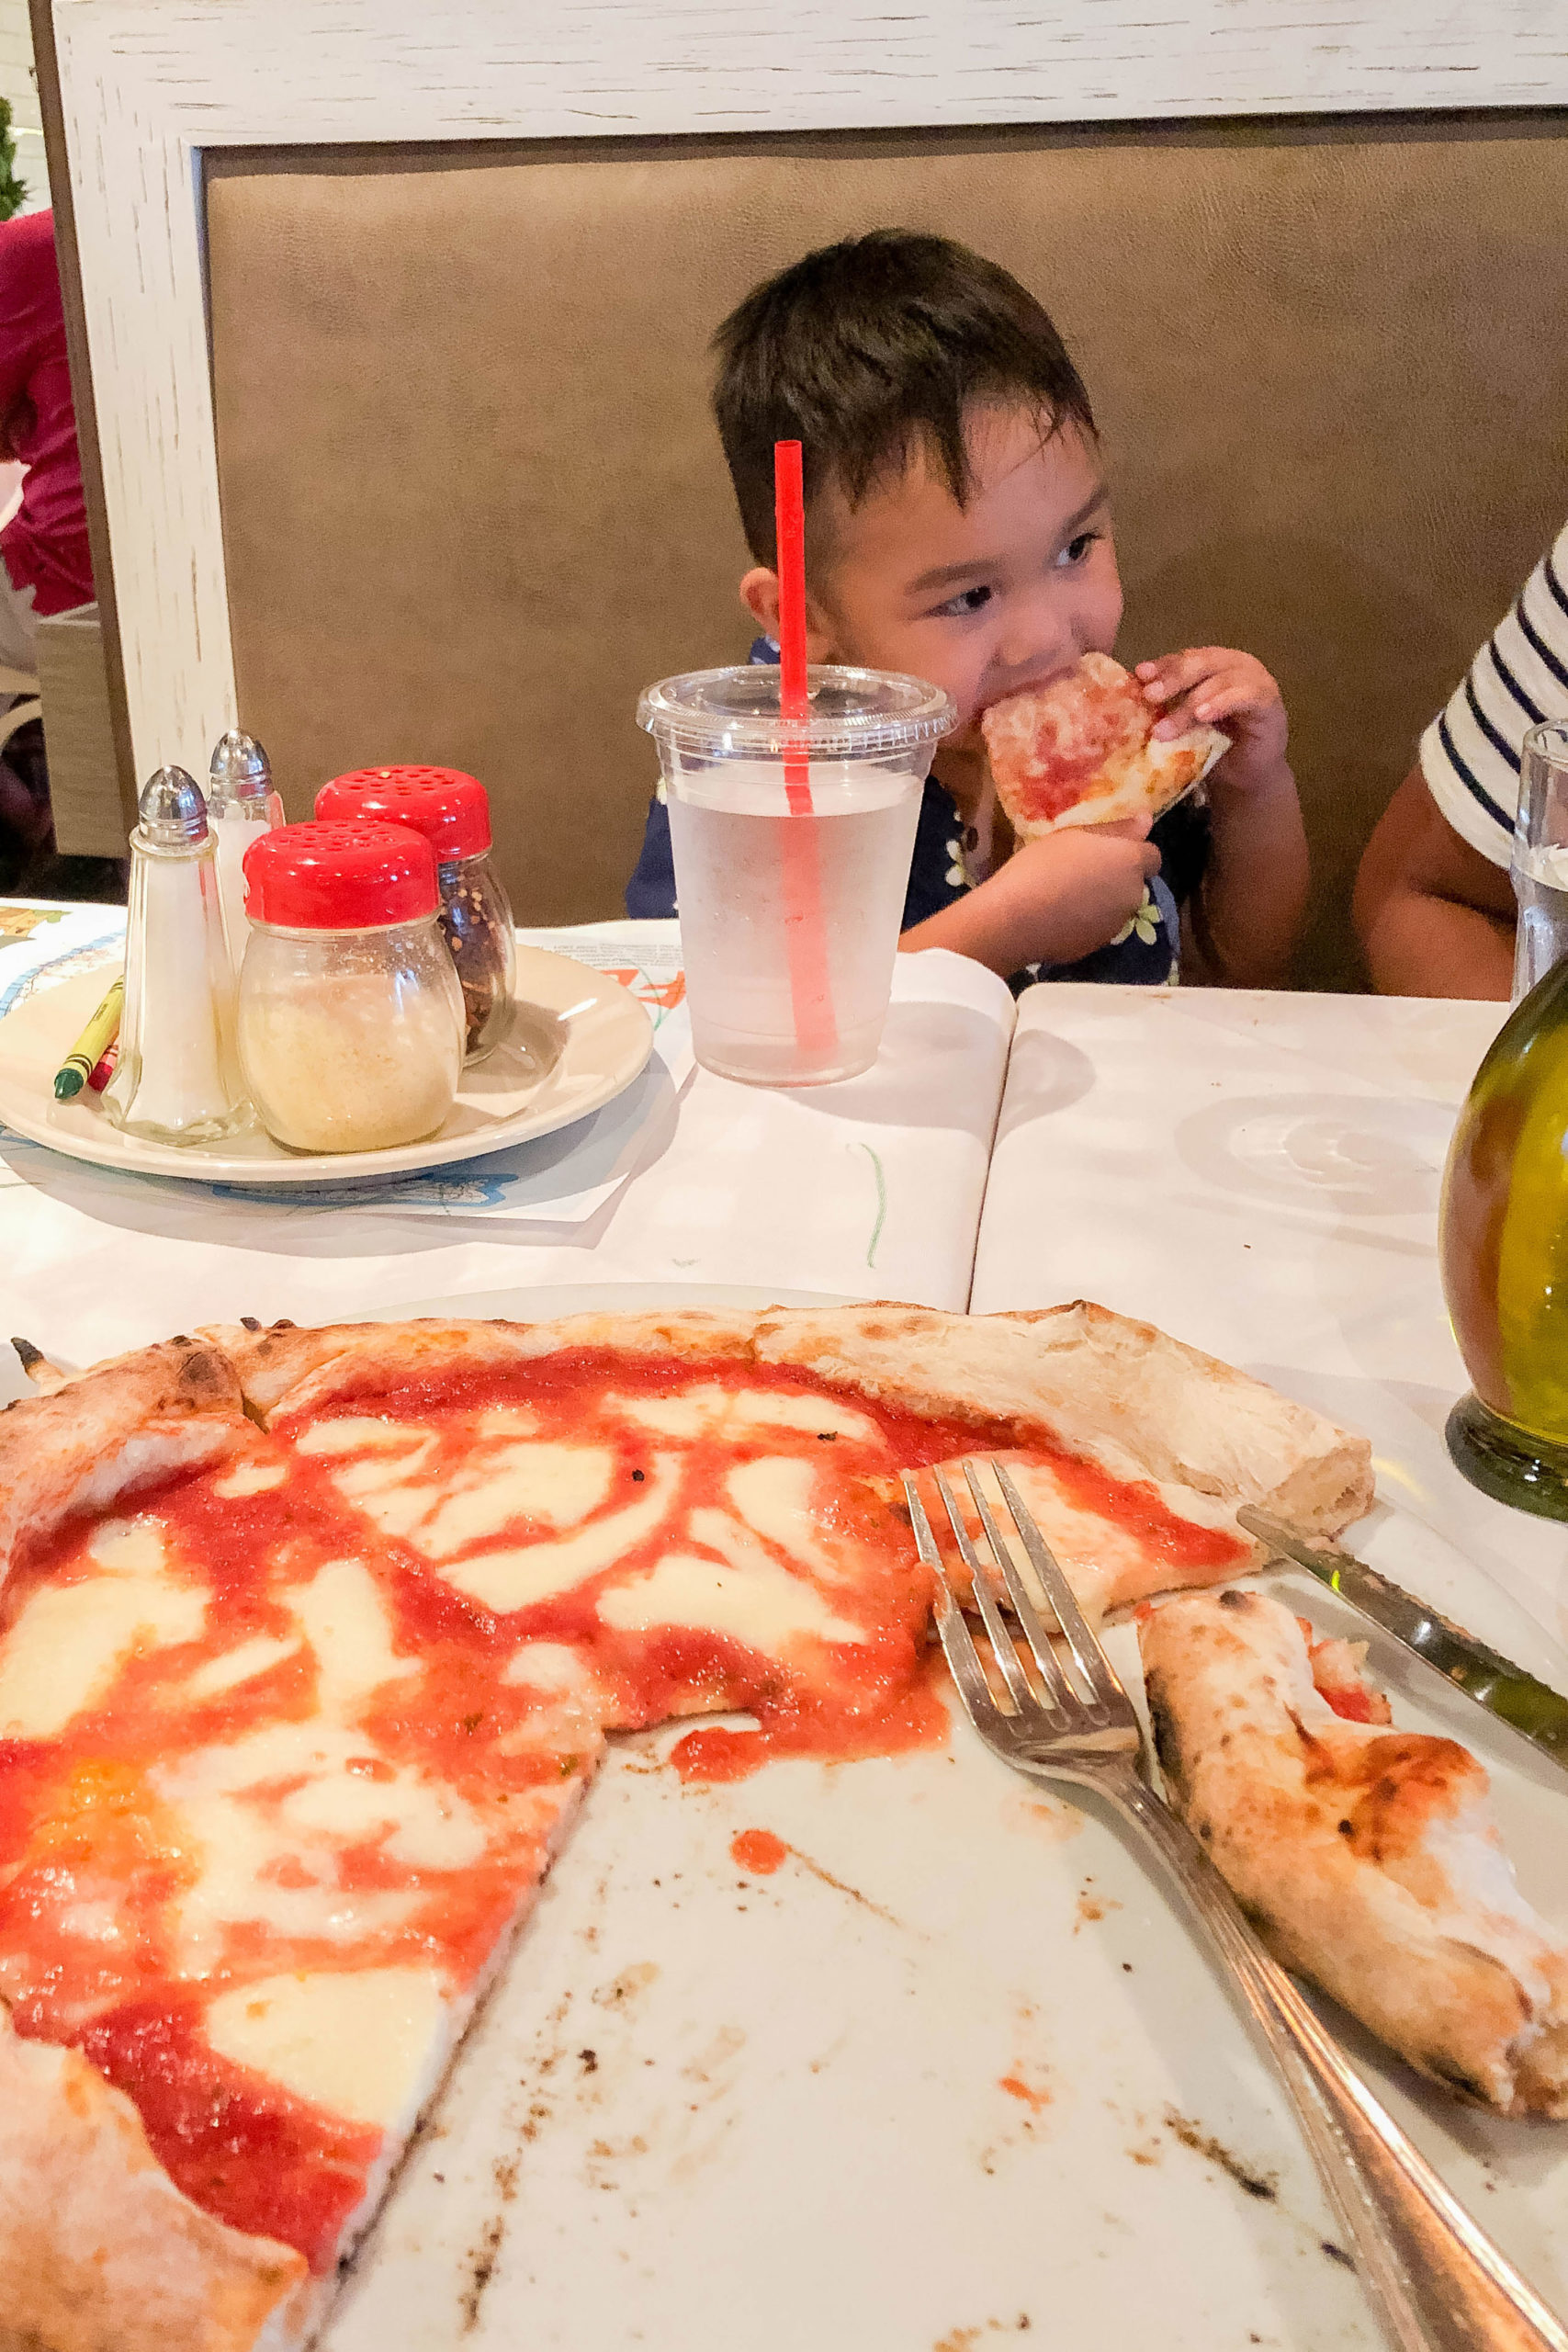 La Trattoria on Naples' famous 5th avenue is an unforgettable restaurant. It offers Neapolitan style pizza and other great starters, dishes and desserts! #naplesflorida